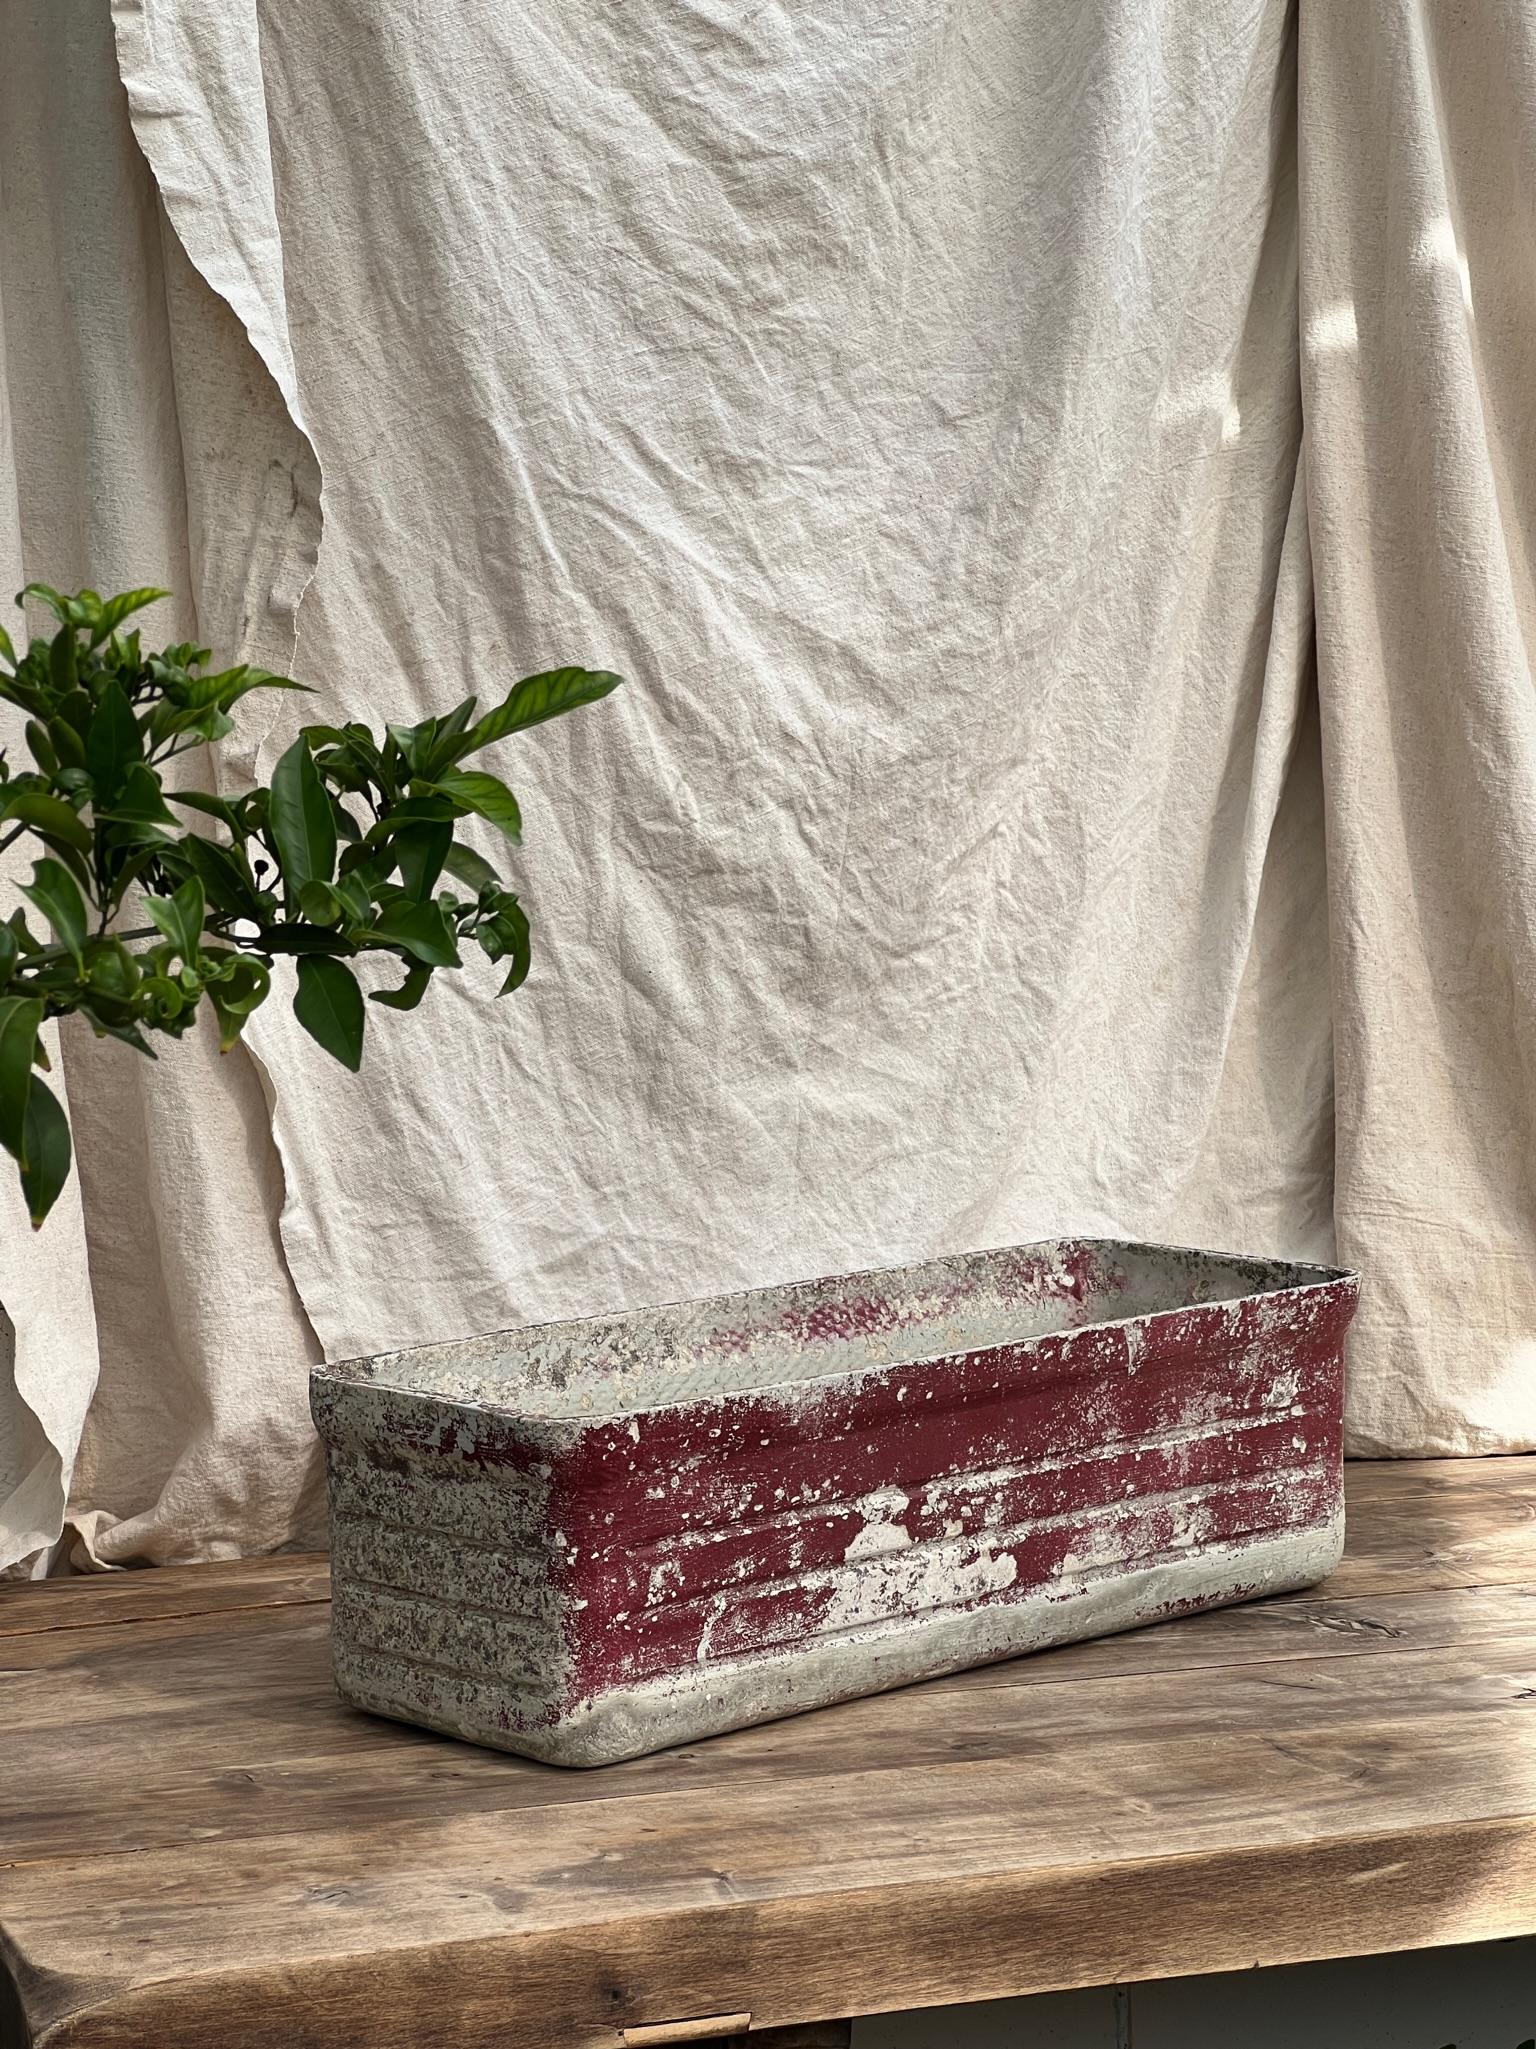 Swiss 1960s Small Red Willy Guhl Rectangular Concrete Planter For Sale